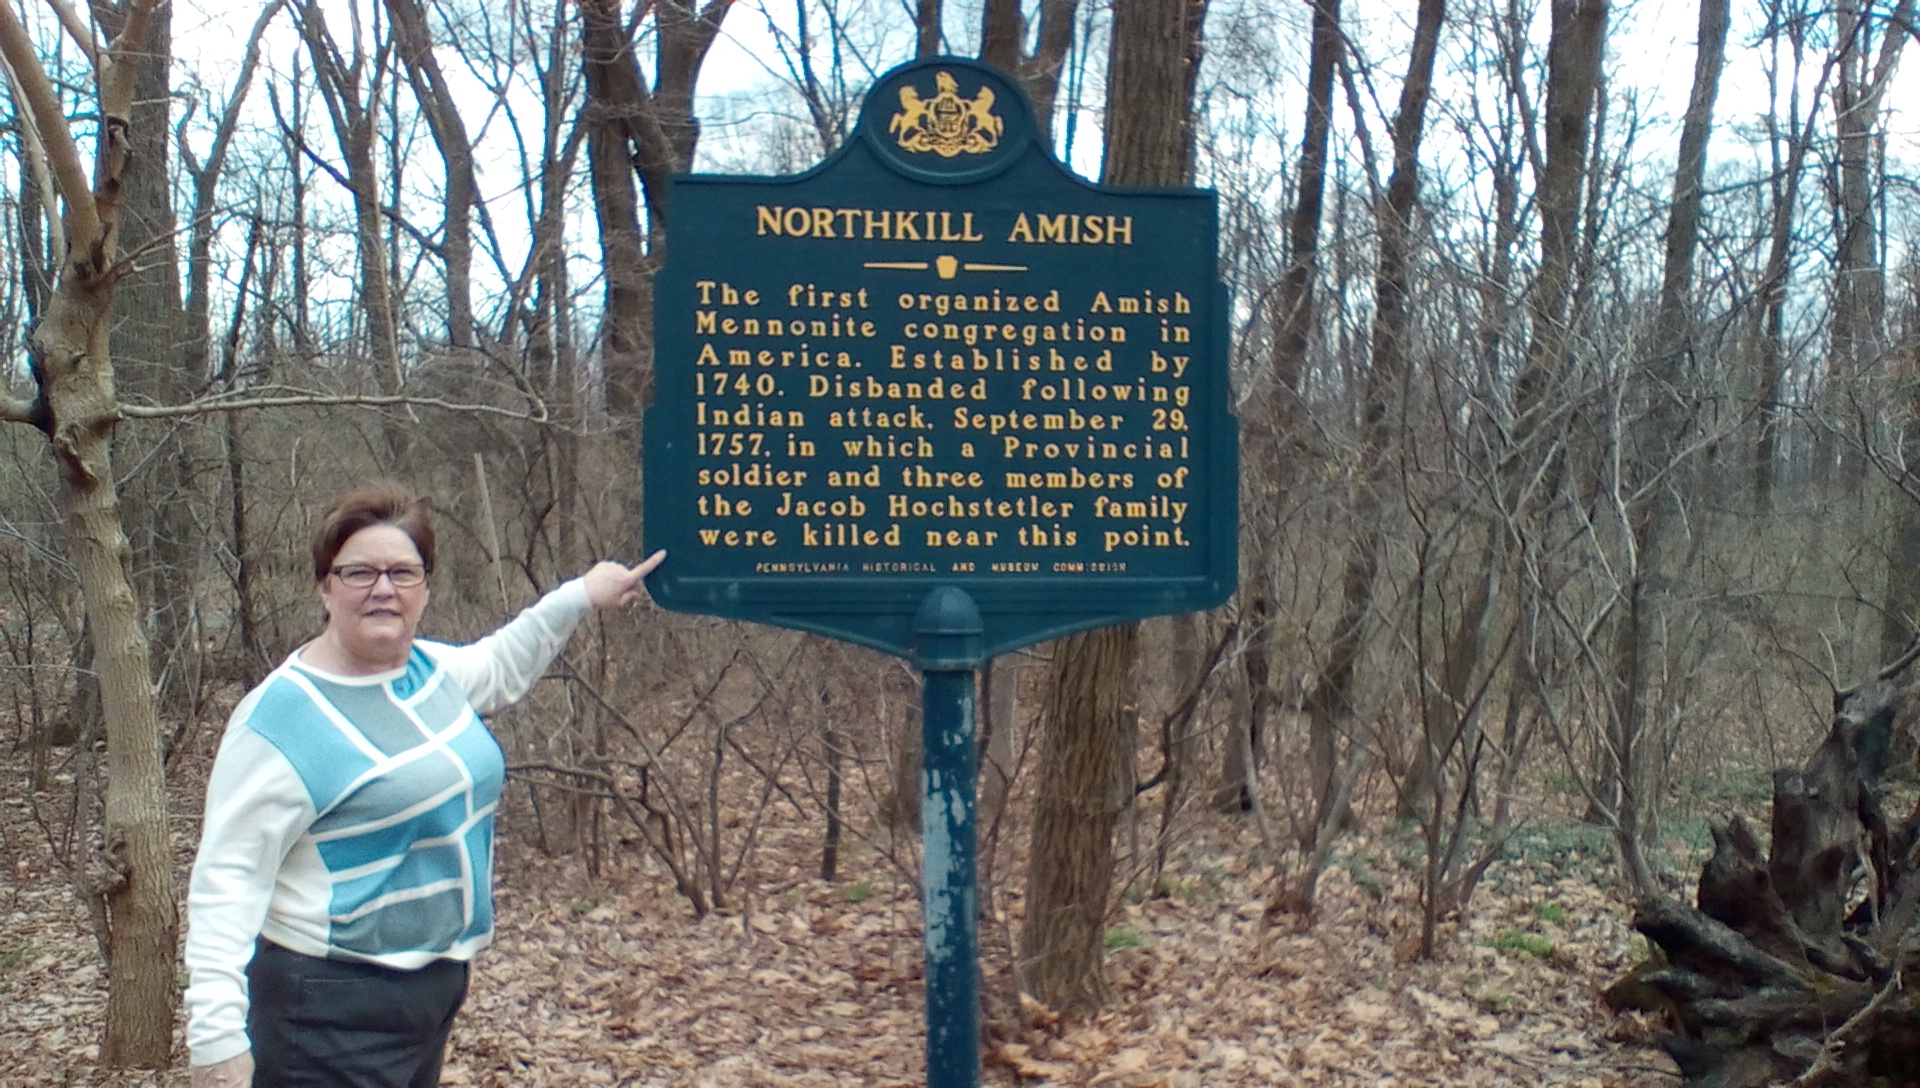 Susan Miller Pearce at PA historical markers, Shartlesville (2016)